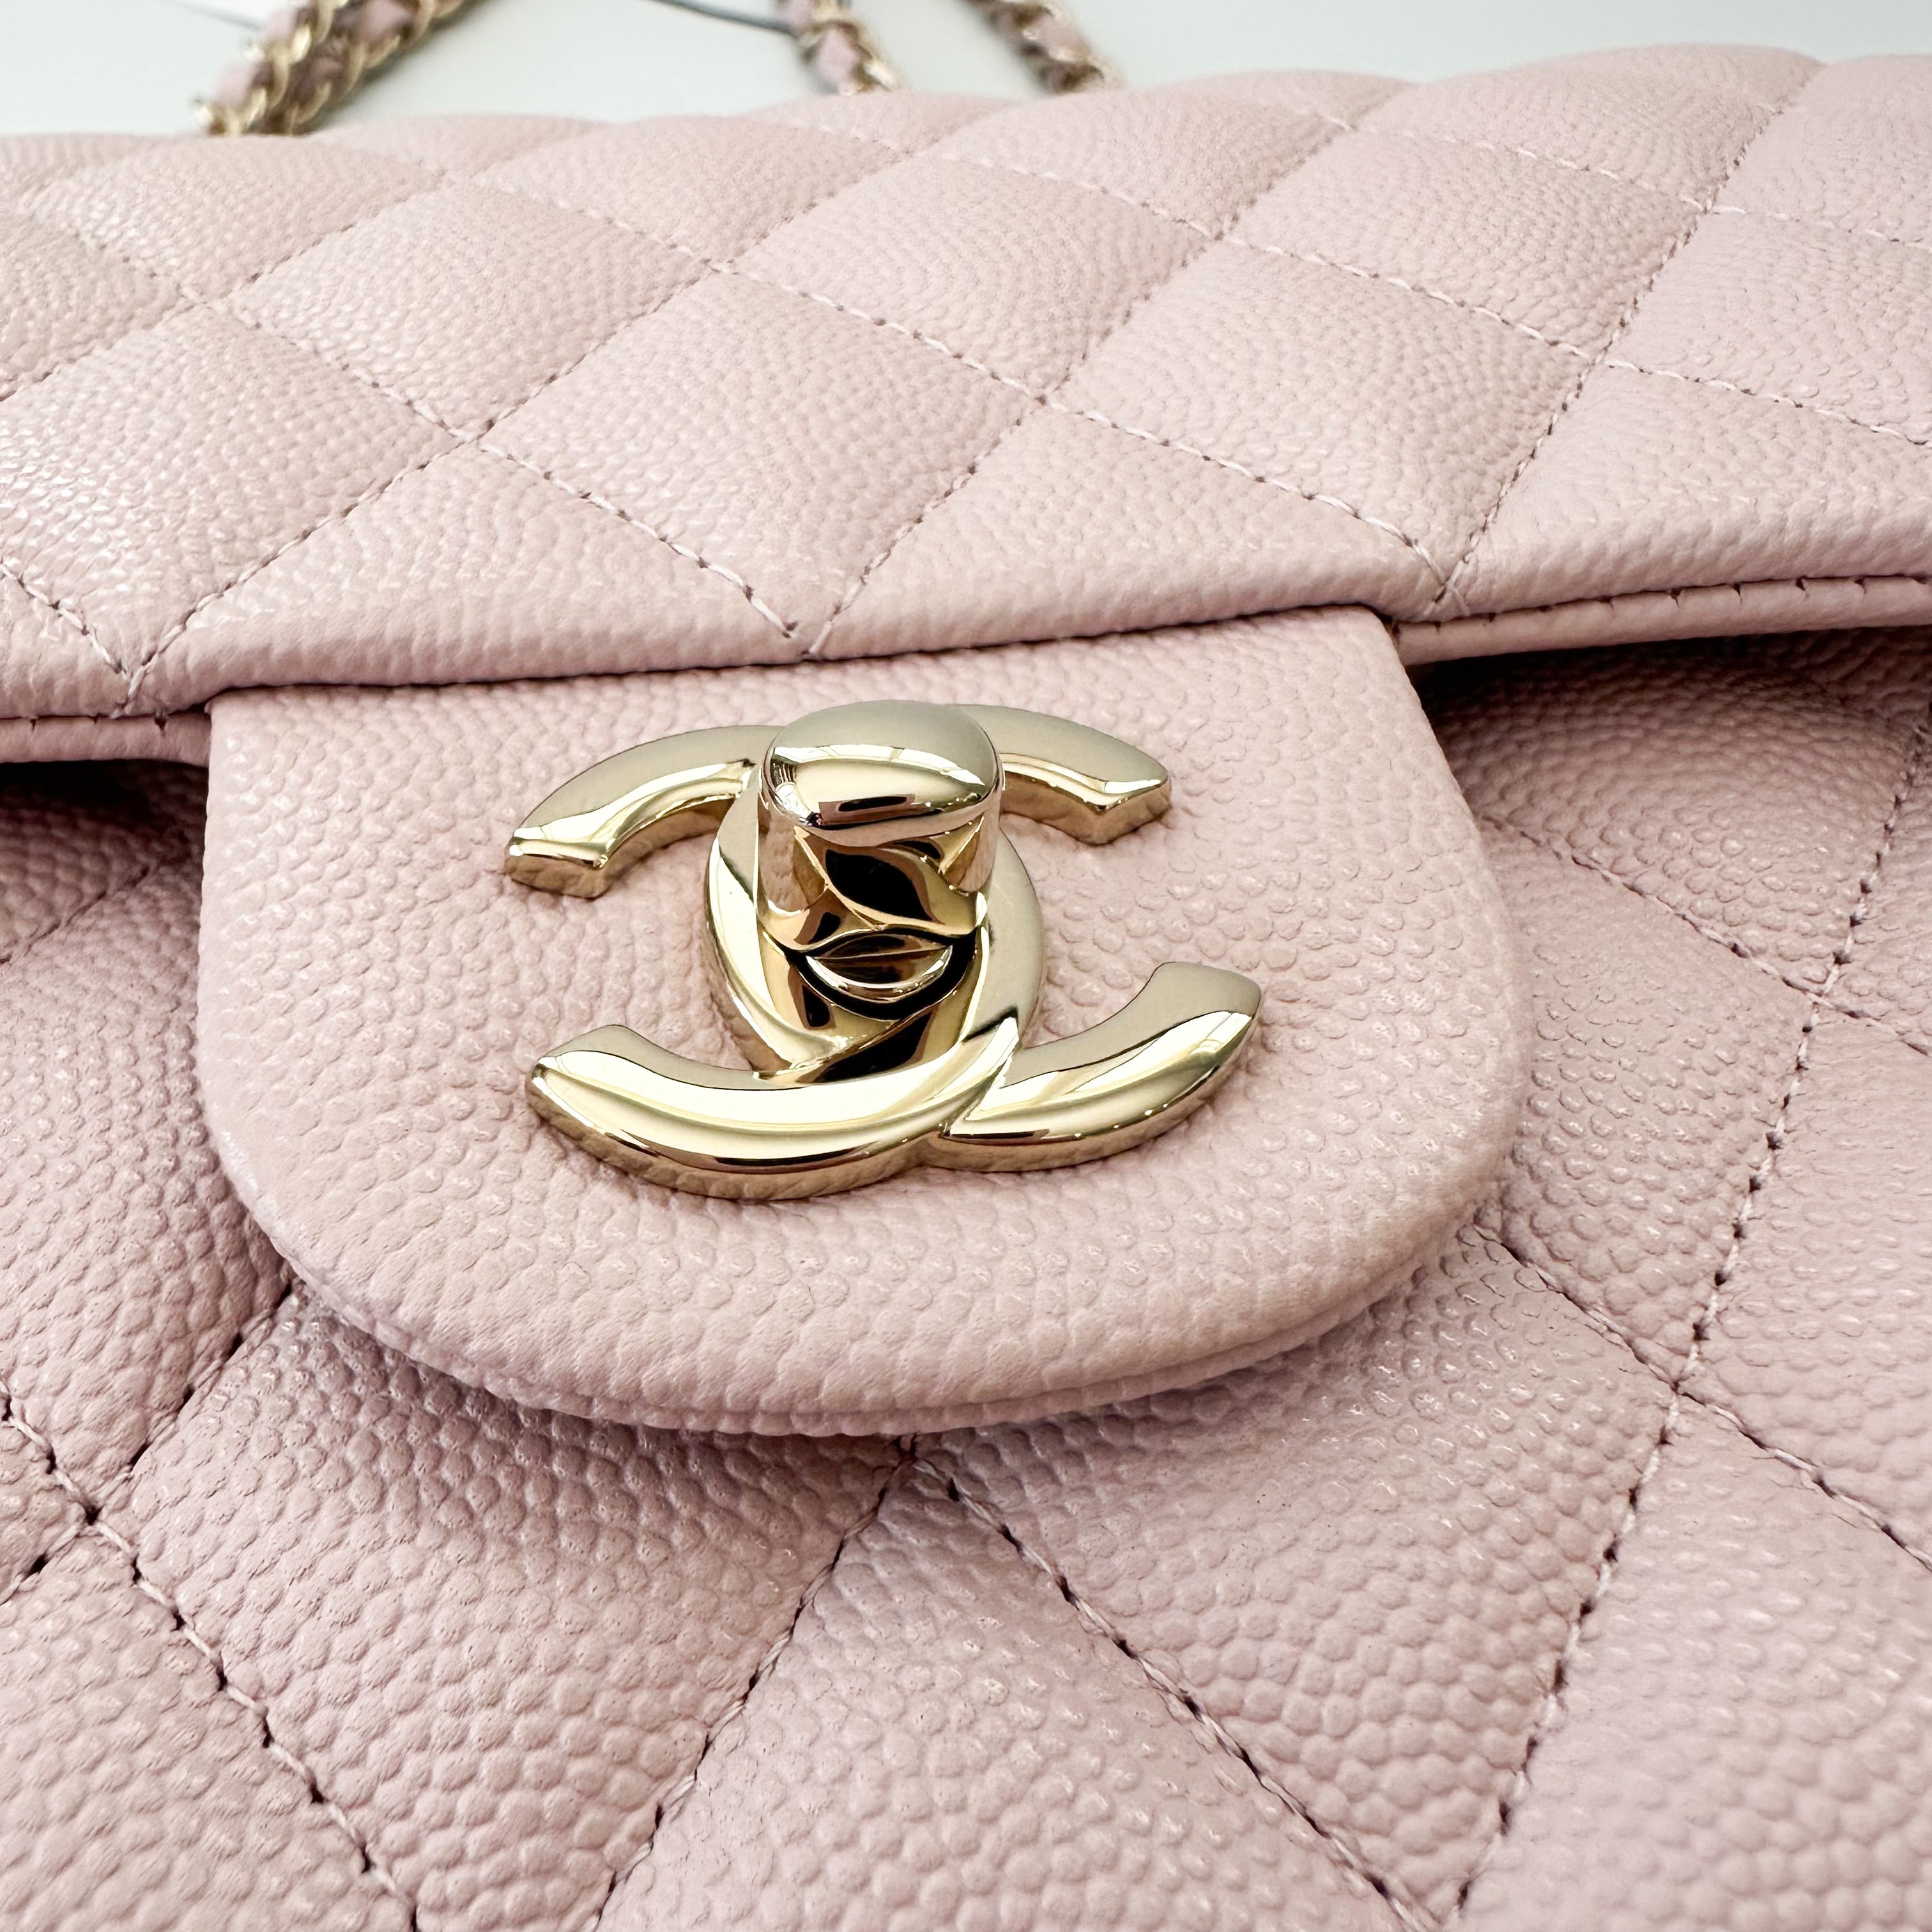 Chanel 21S Pink Clair Caviar Classic Flap Quilted Medium LGHW